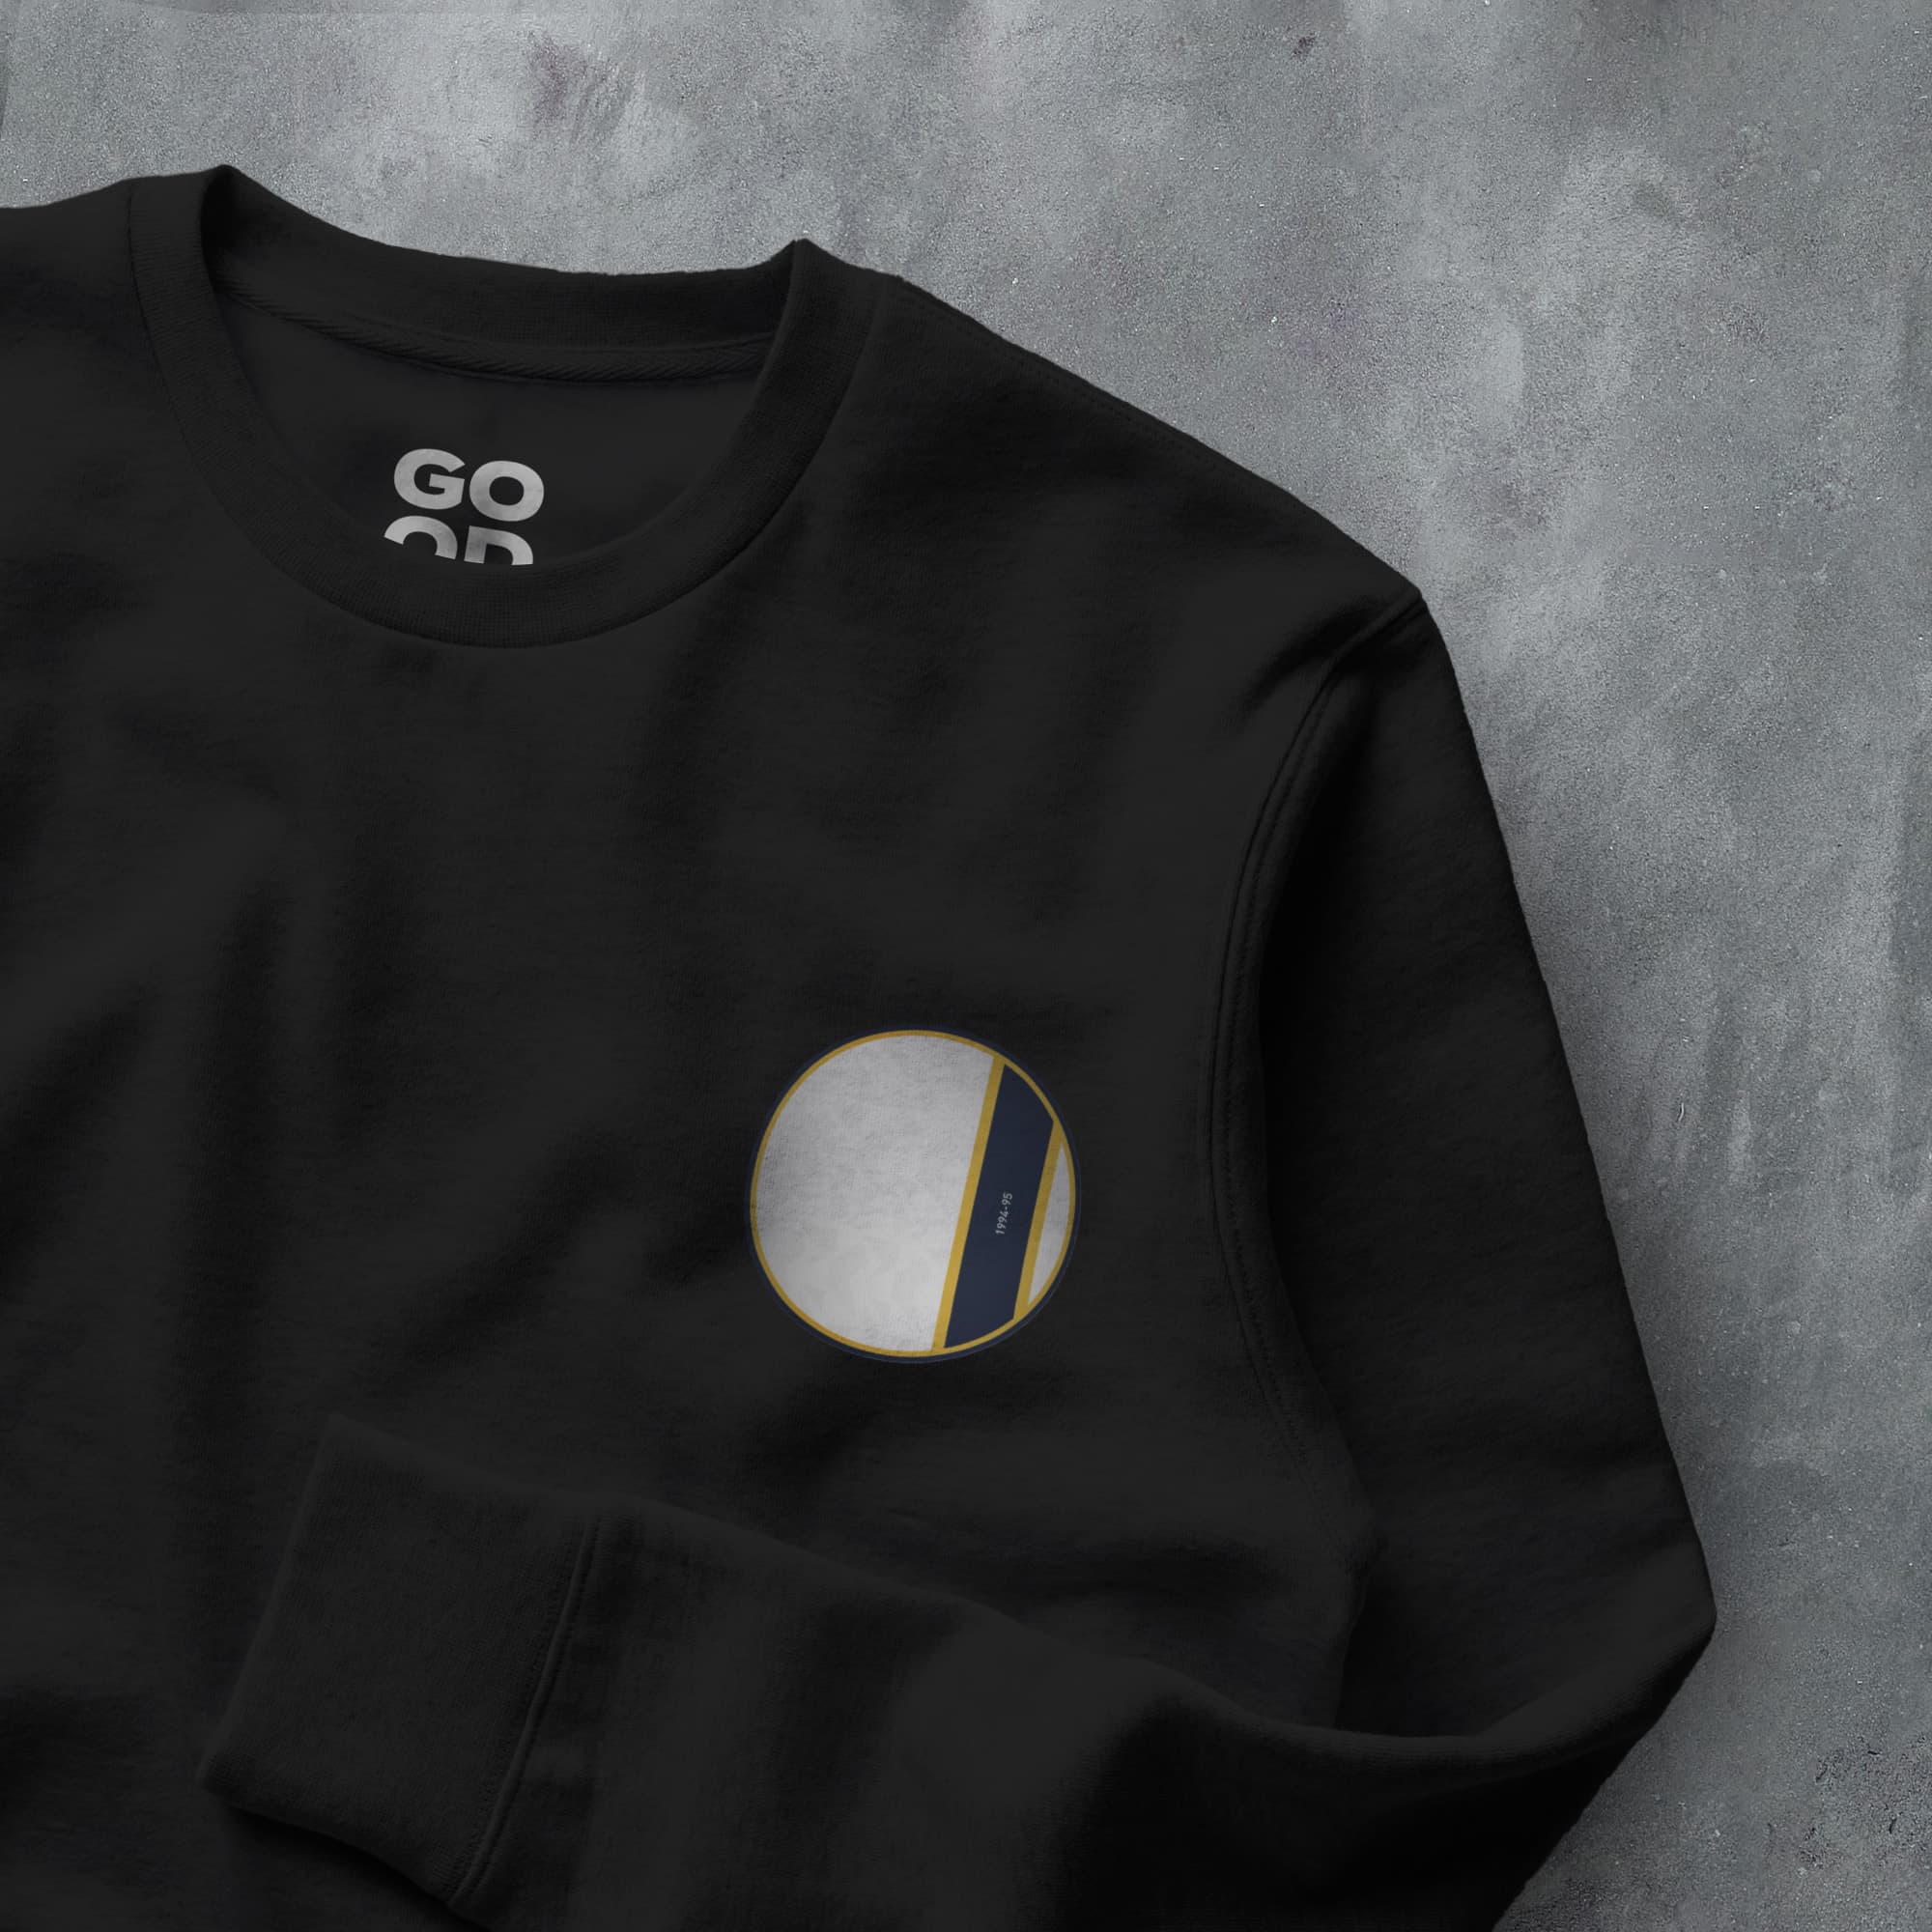 a black sweatshirt with a white circle on it